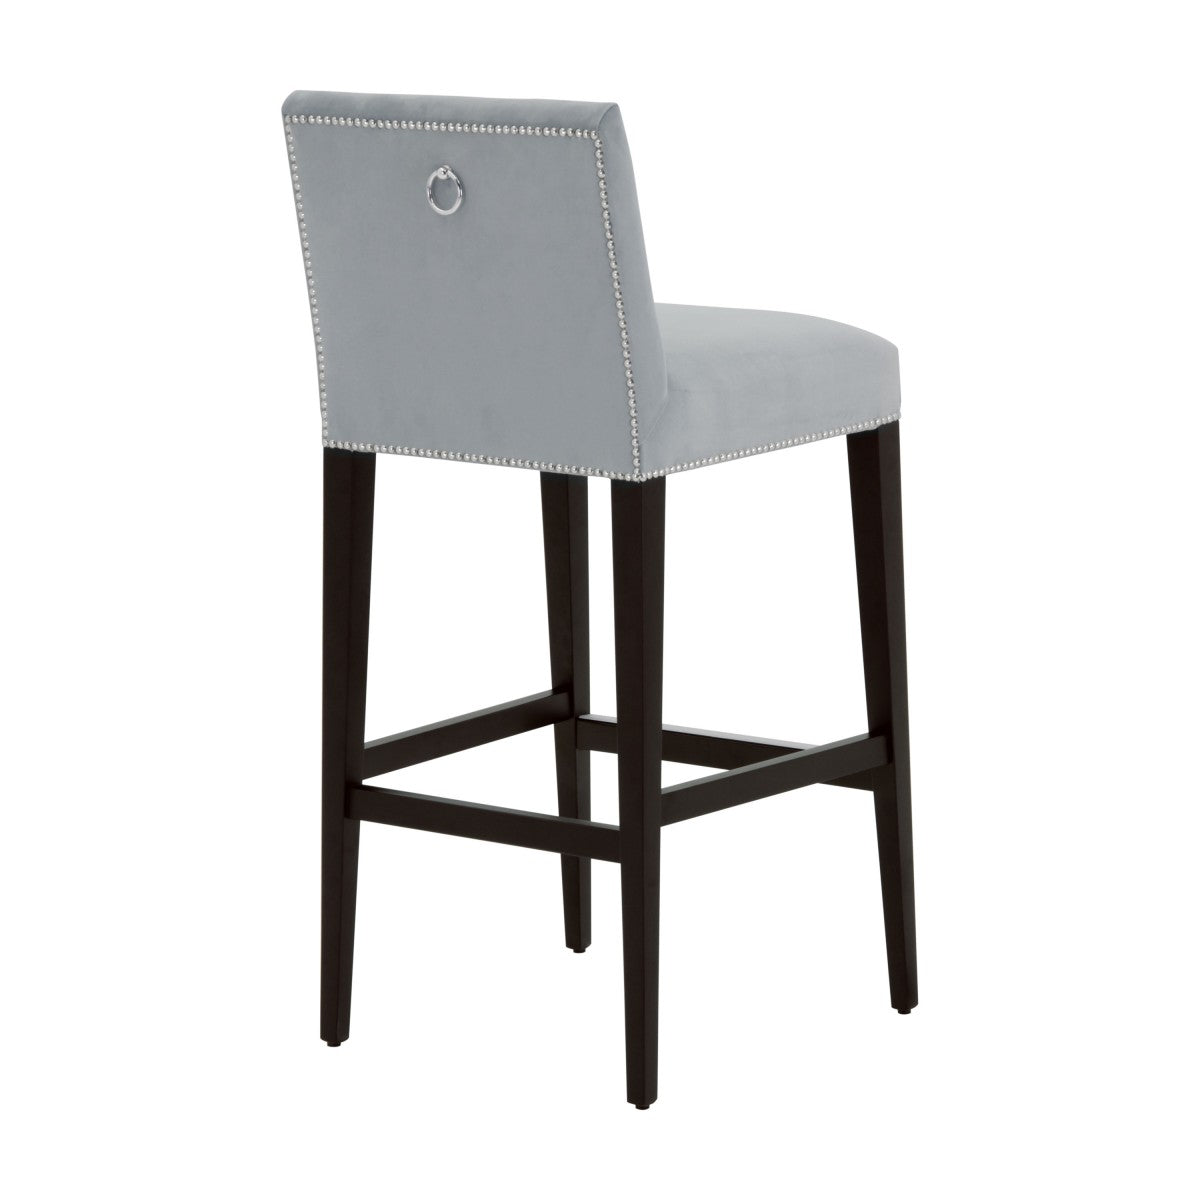 Ariana Bespoke Upholstered Contemporary Low Back Kitchen Barstool MS324B Custom Made To Order